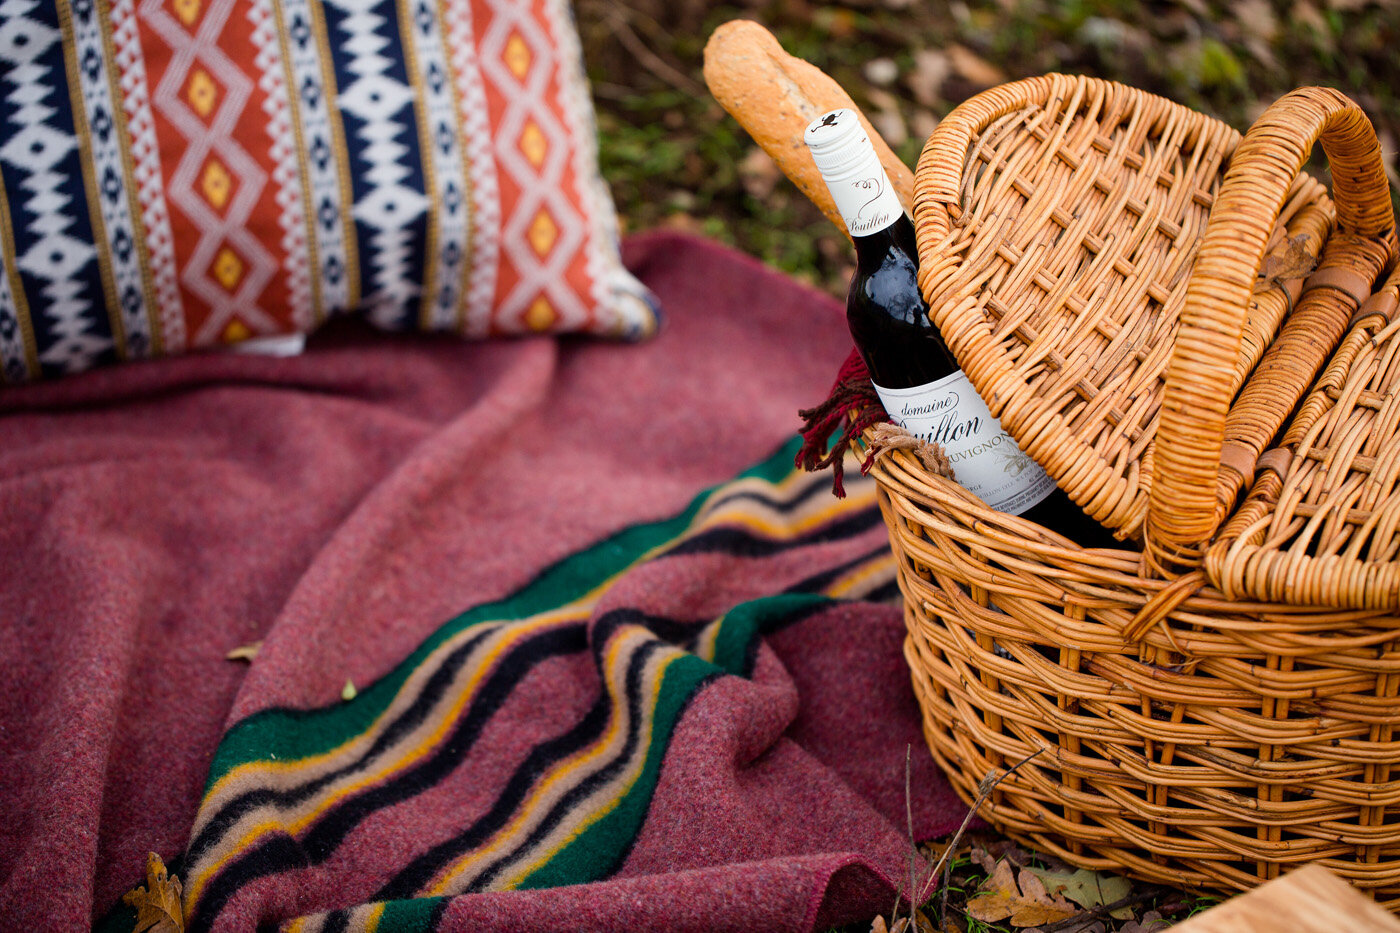 Autumn picnic basket with wine